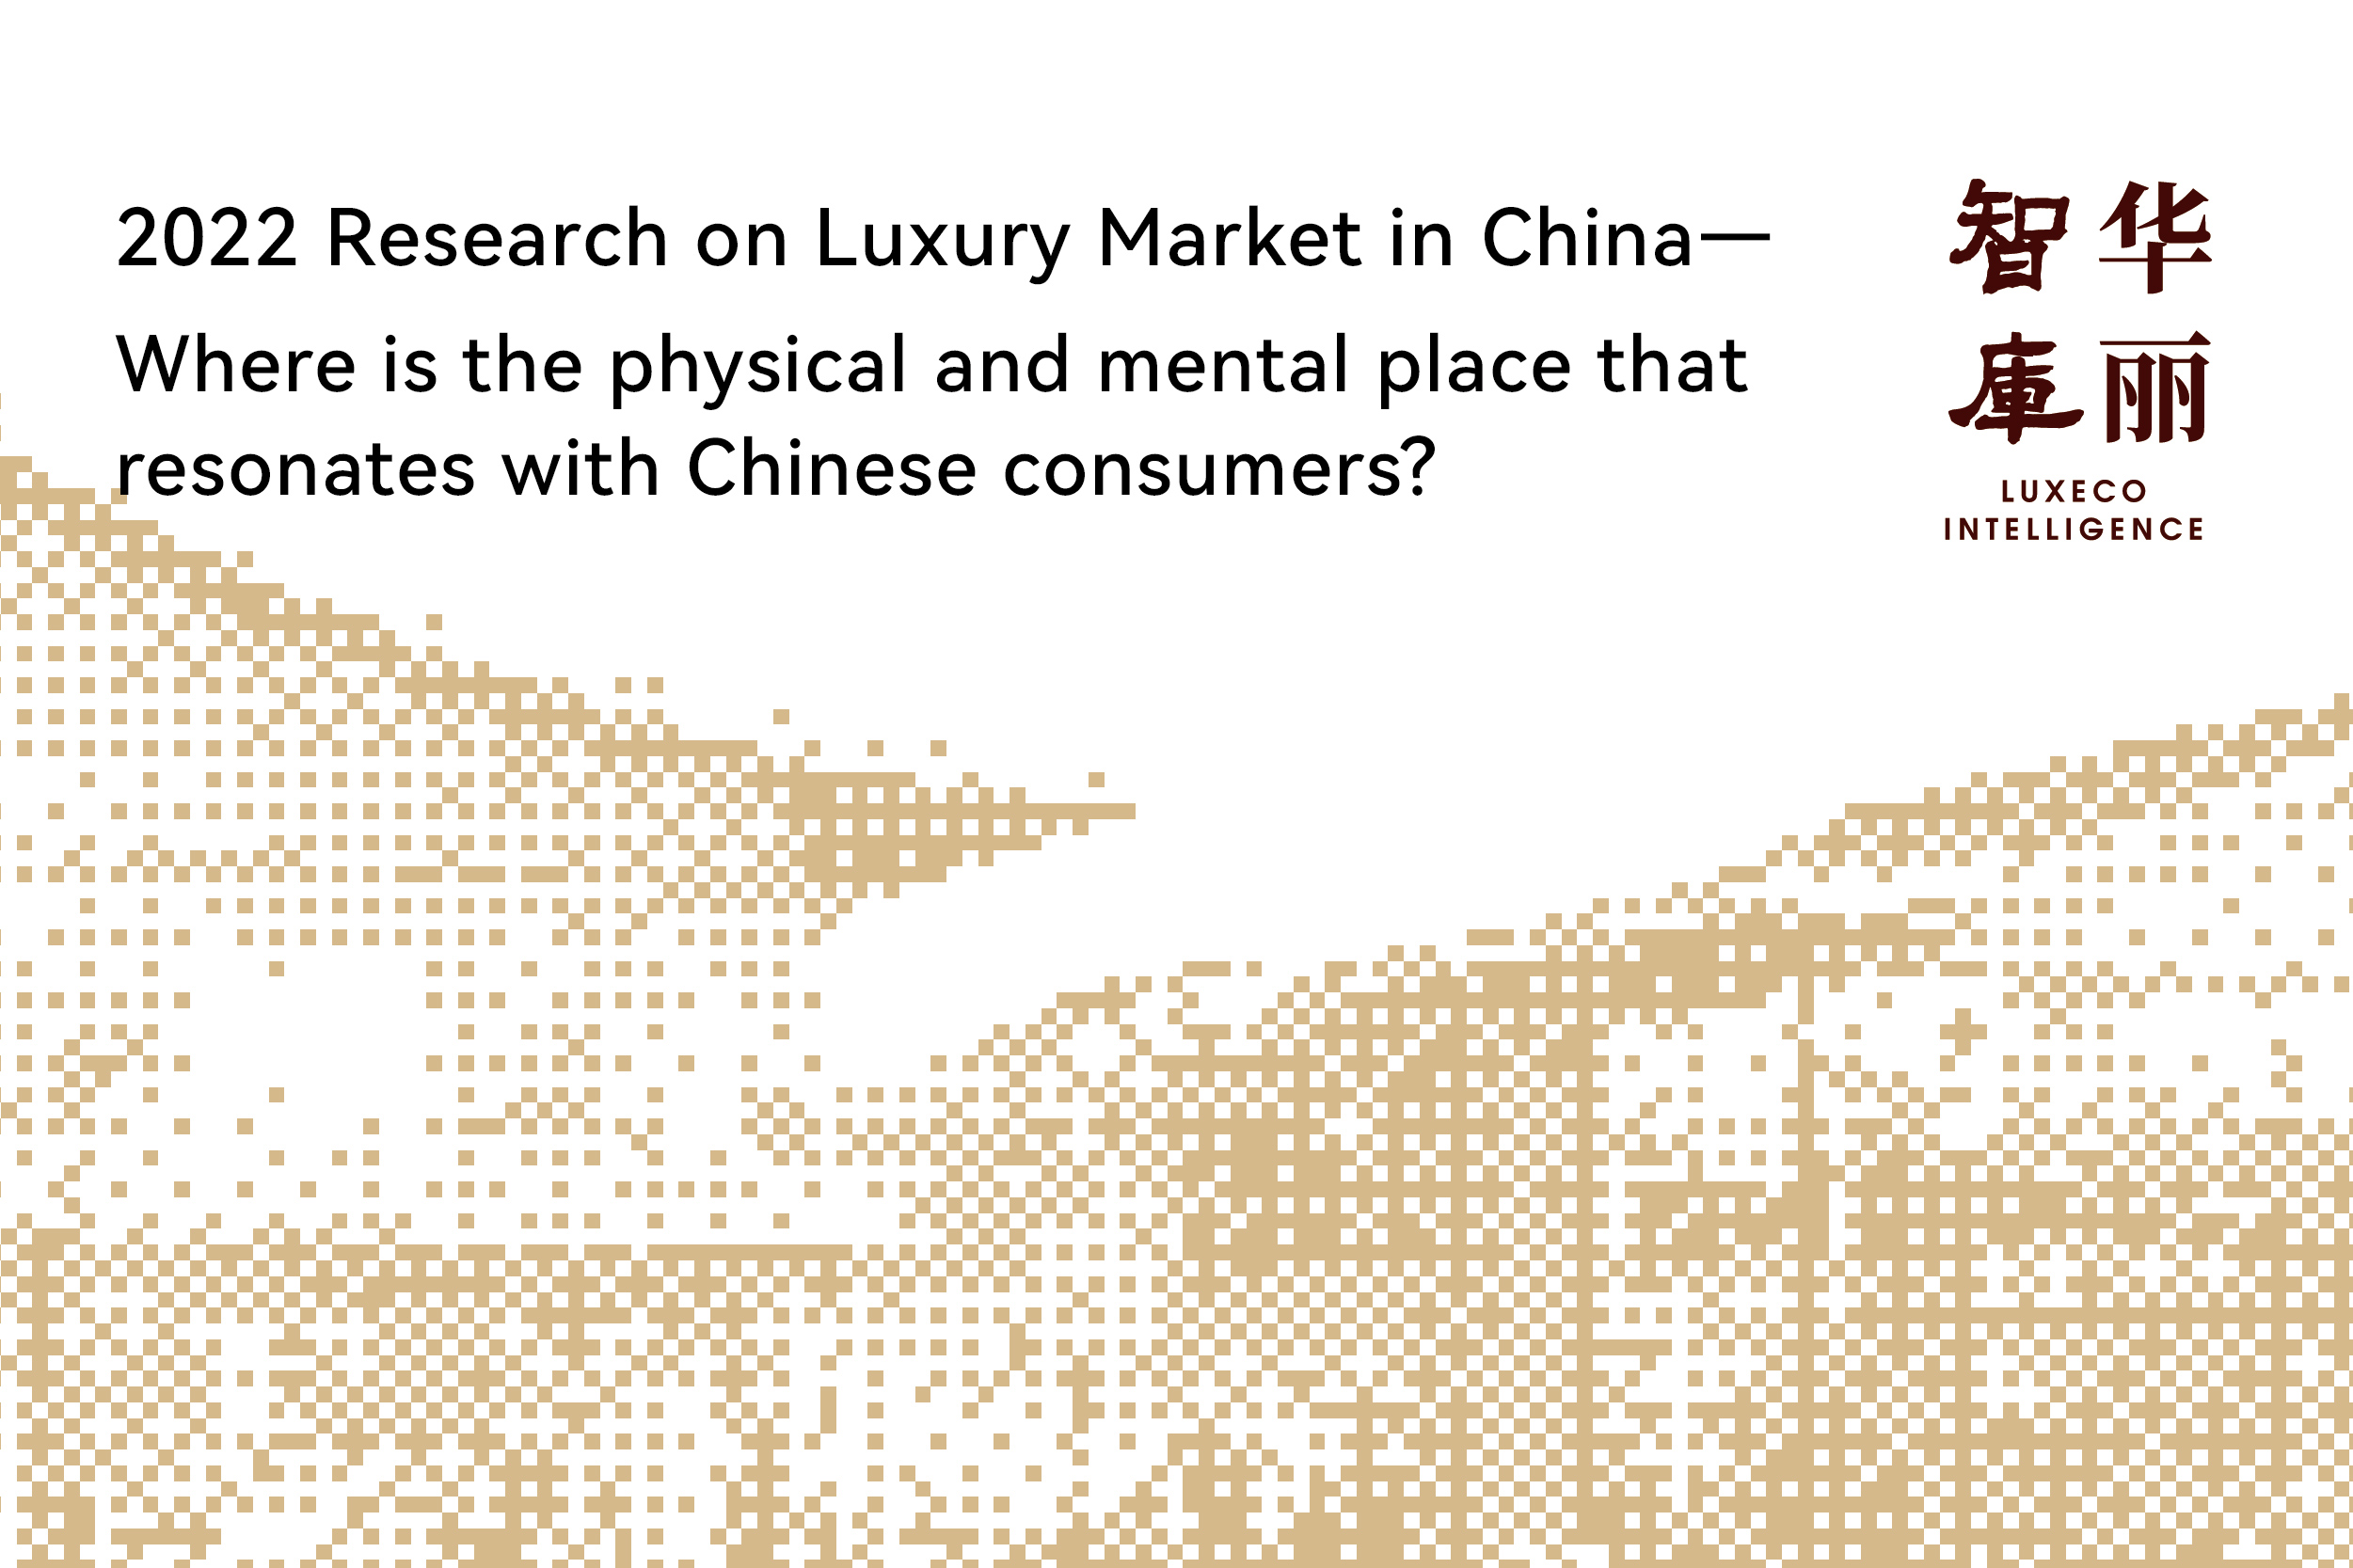 Exclusive Report (Free Download) | 2022 Research on Luxury Market in China: Where is the physical and mental place that resonates with Chinese consumers?